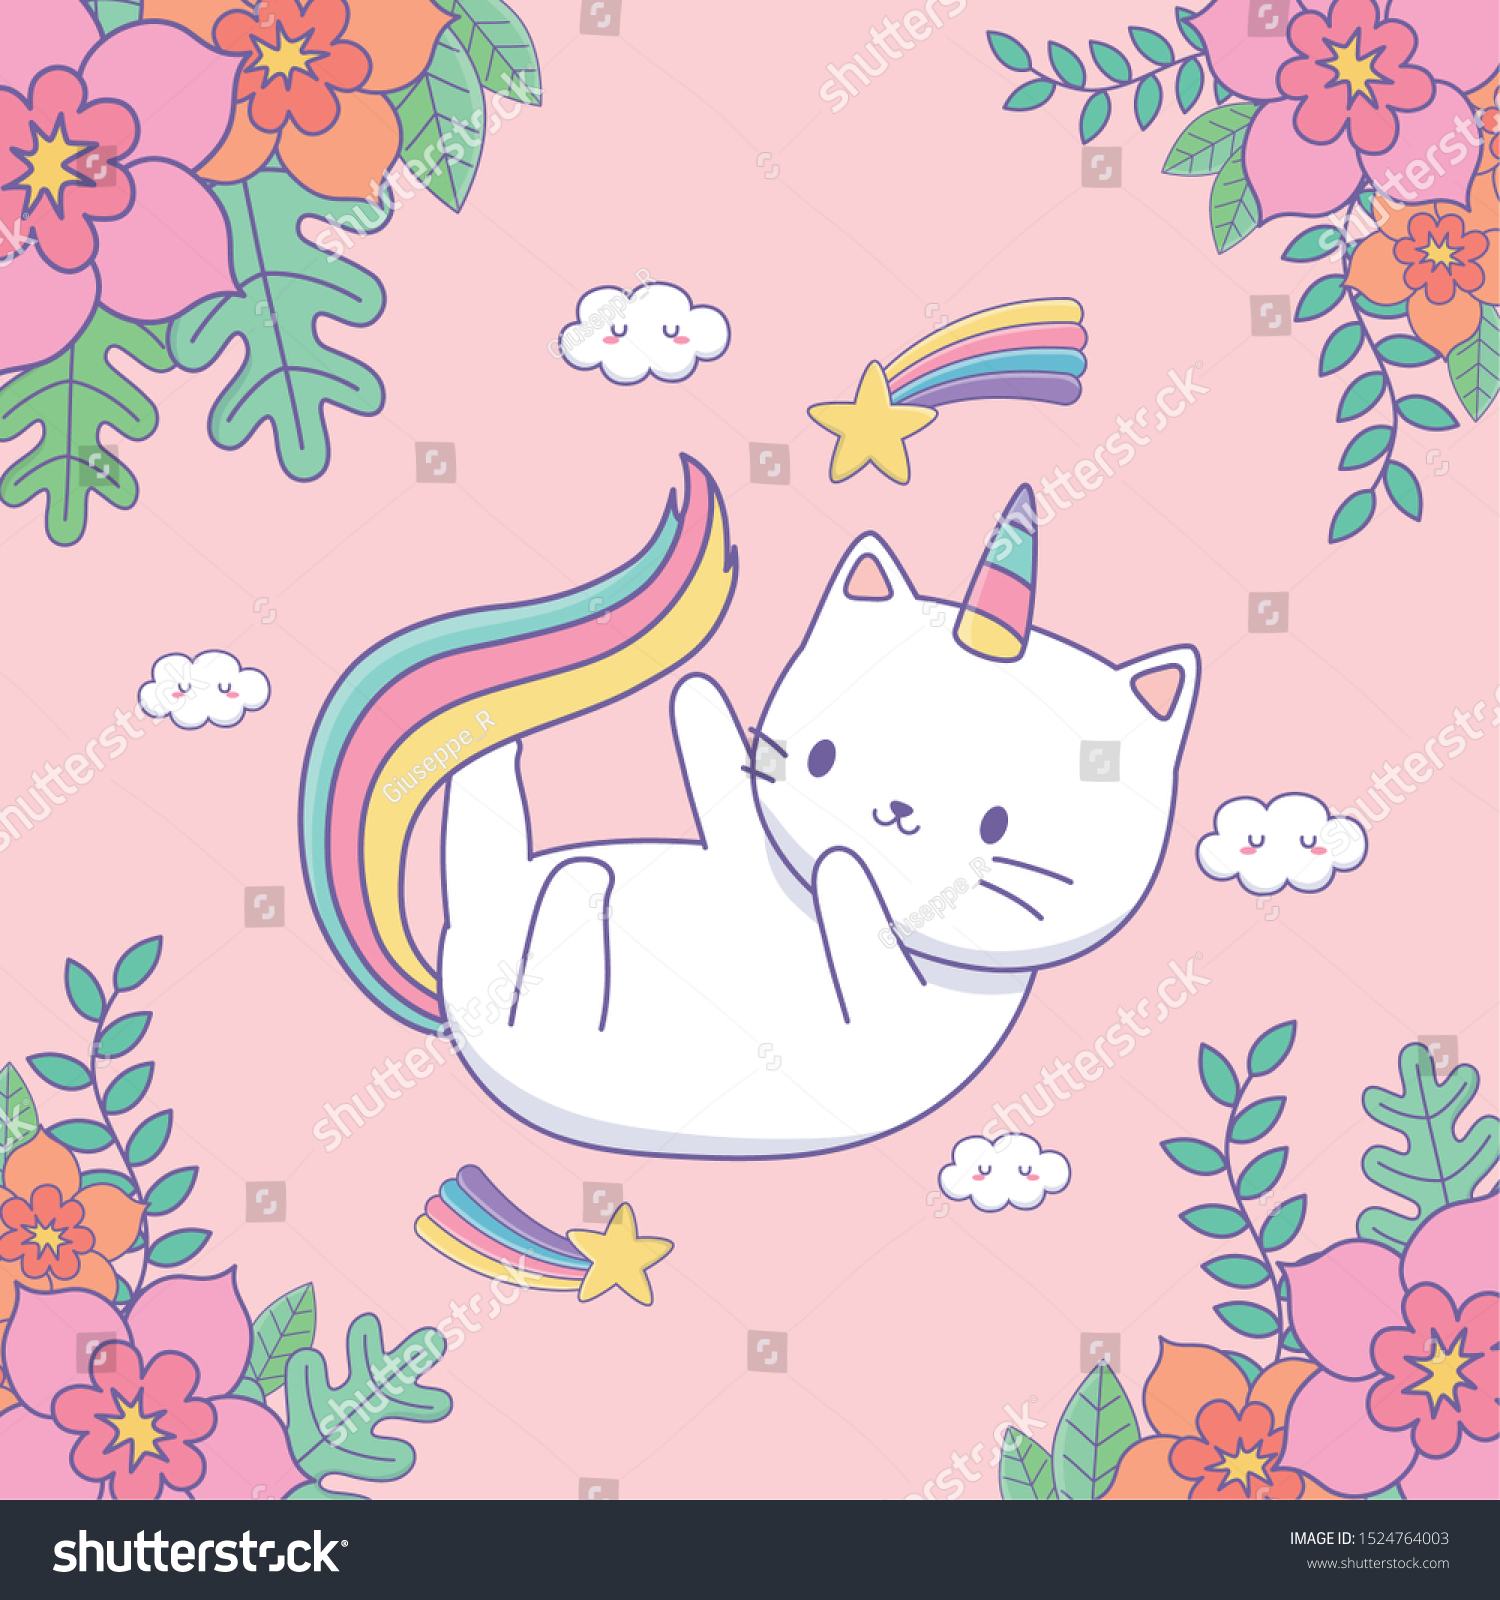 SVG of cute caticorn with floral decoration and rainbow vector illustration design svg